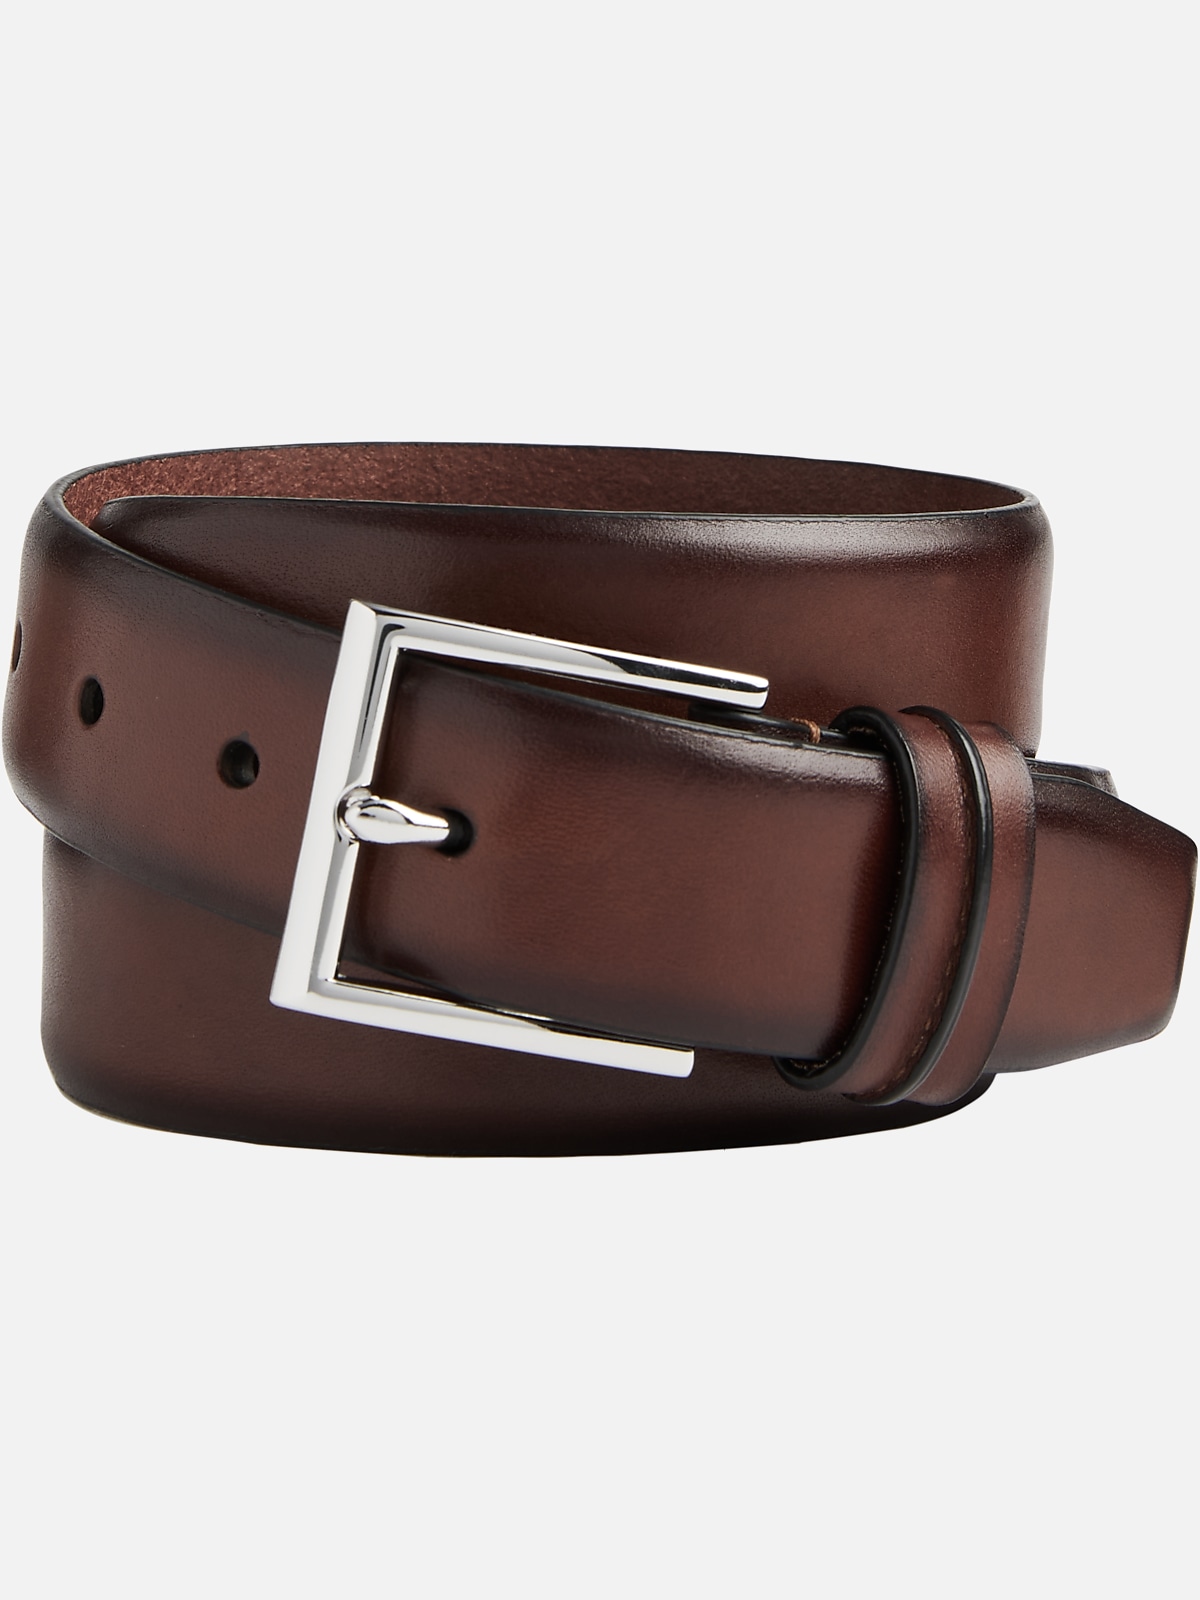 Cole Haan Zero Grand Leather Belt | All Clearance $39.99| Men's Wearhouse